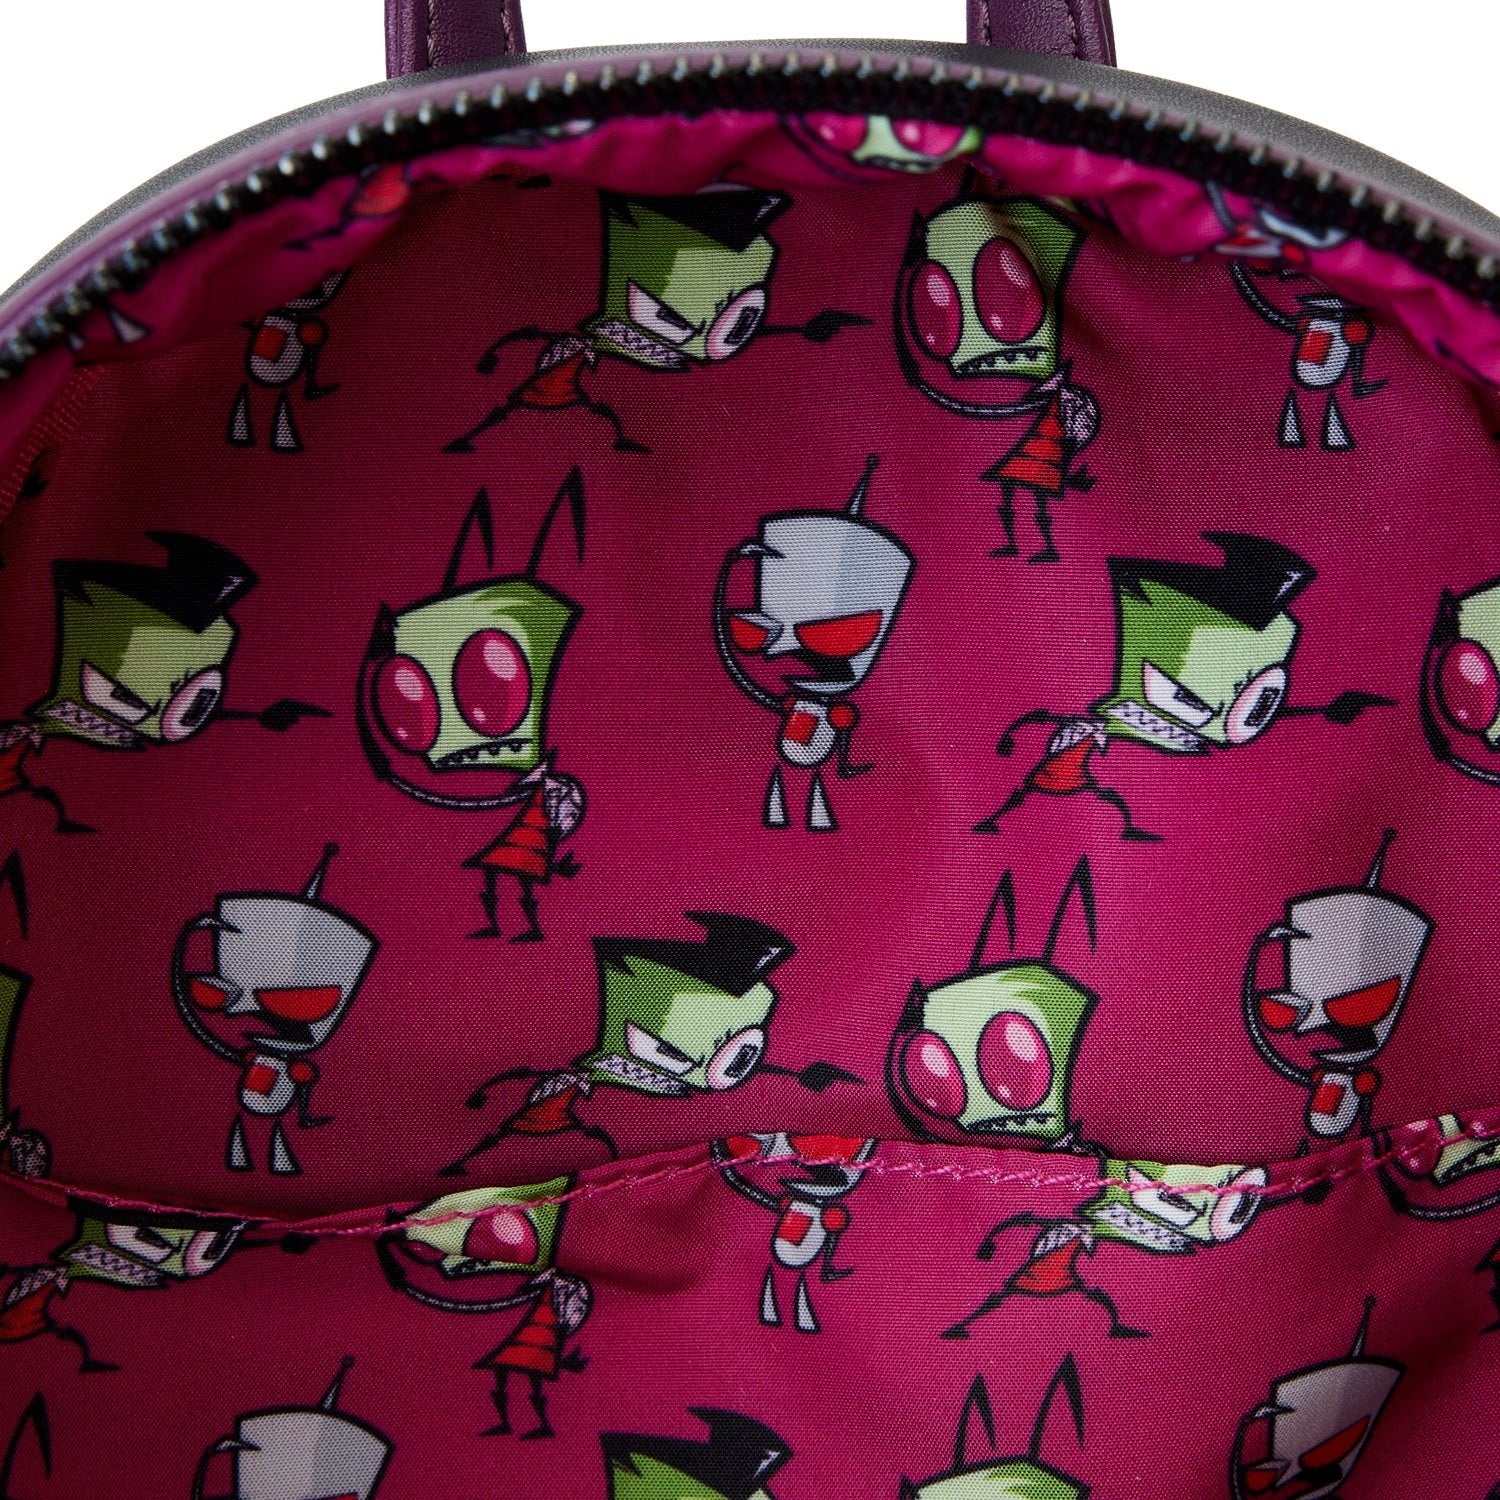 Loungefly x Nickelodeon Invader Zim Secret Lair Mini Backpack - GeekCore